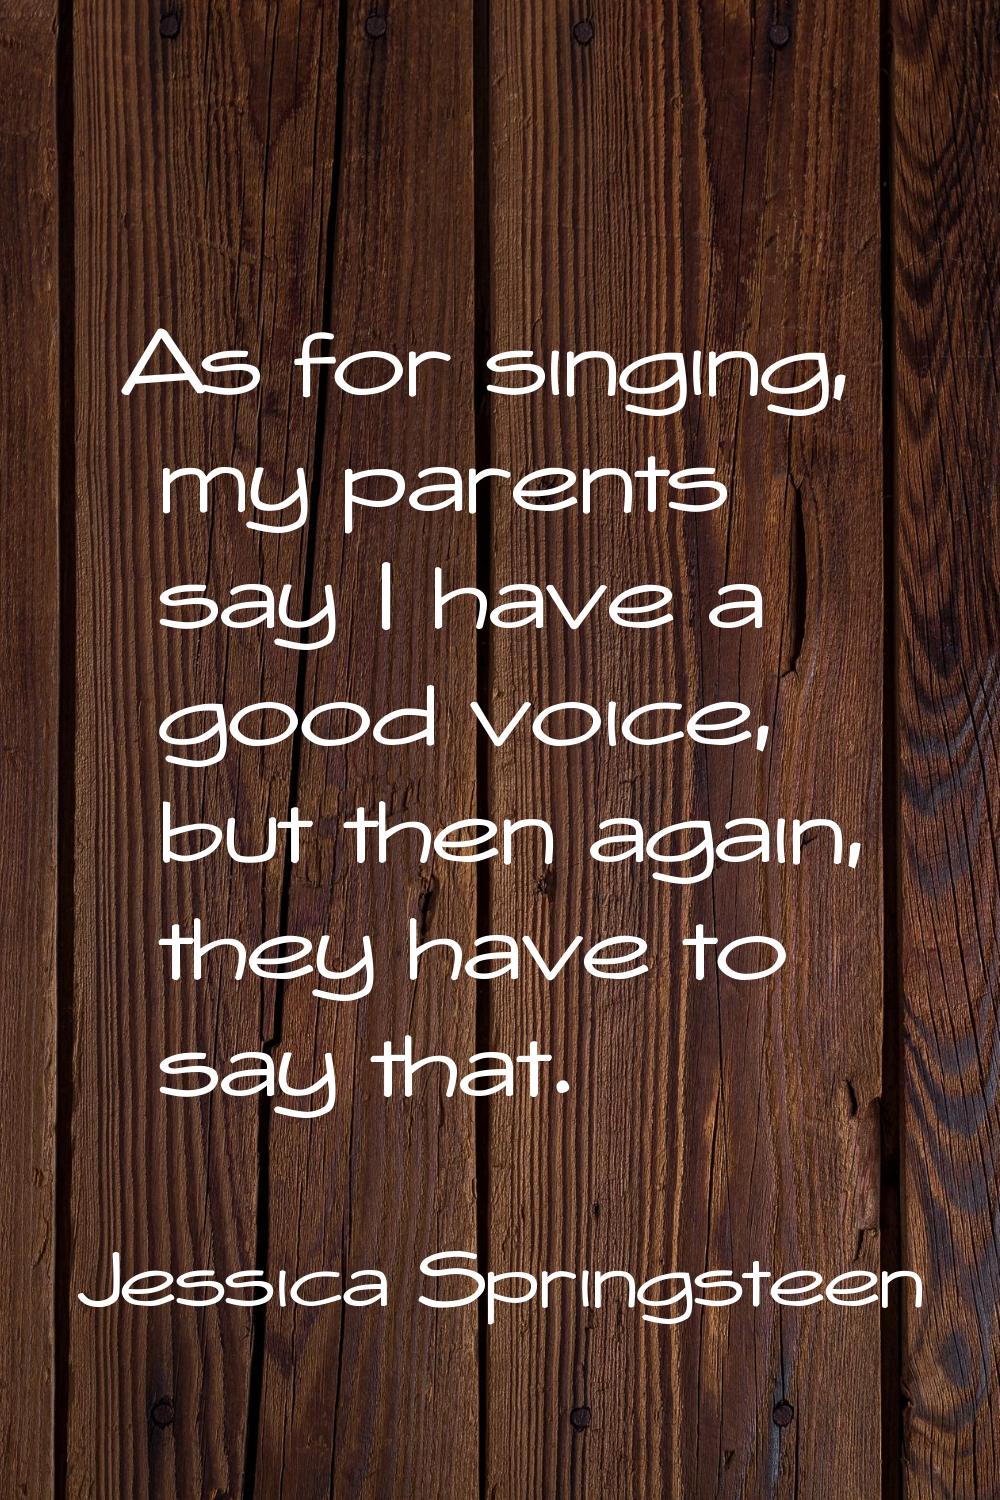 As for singing, my parents say I have a good voice, but then again, they have to say that.